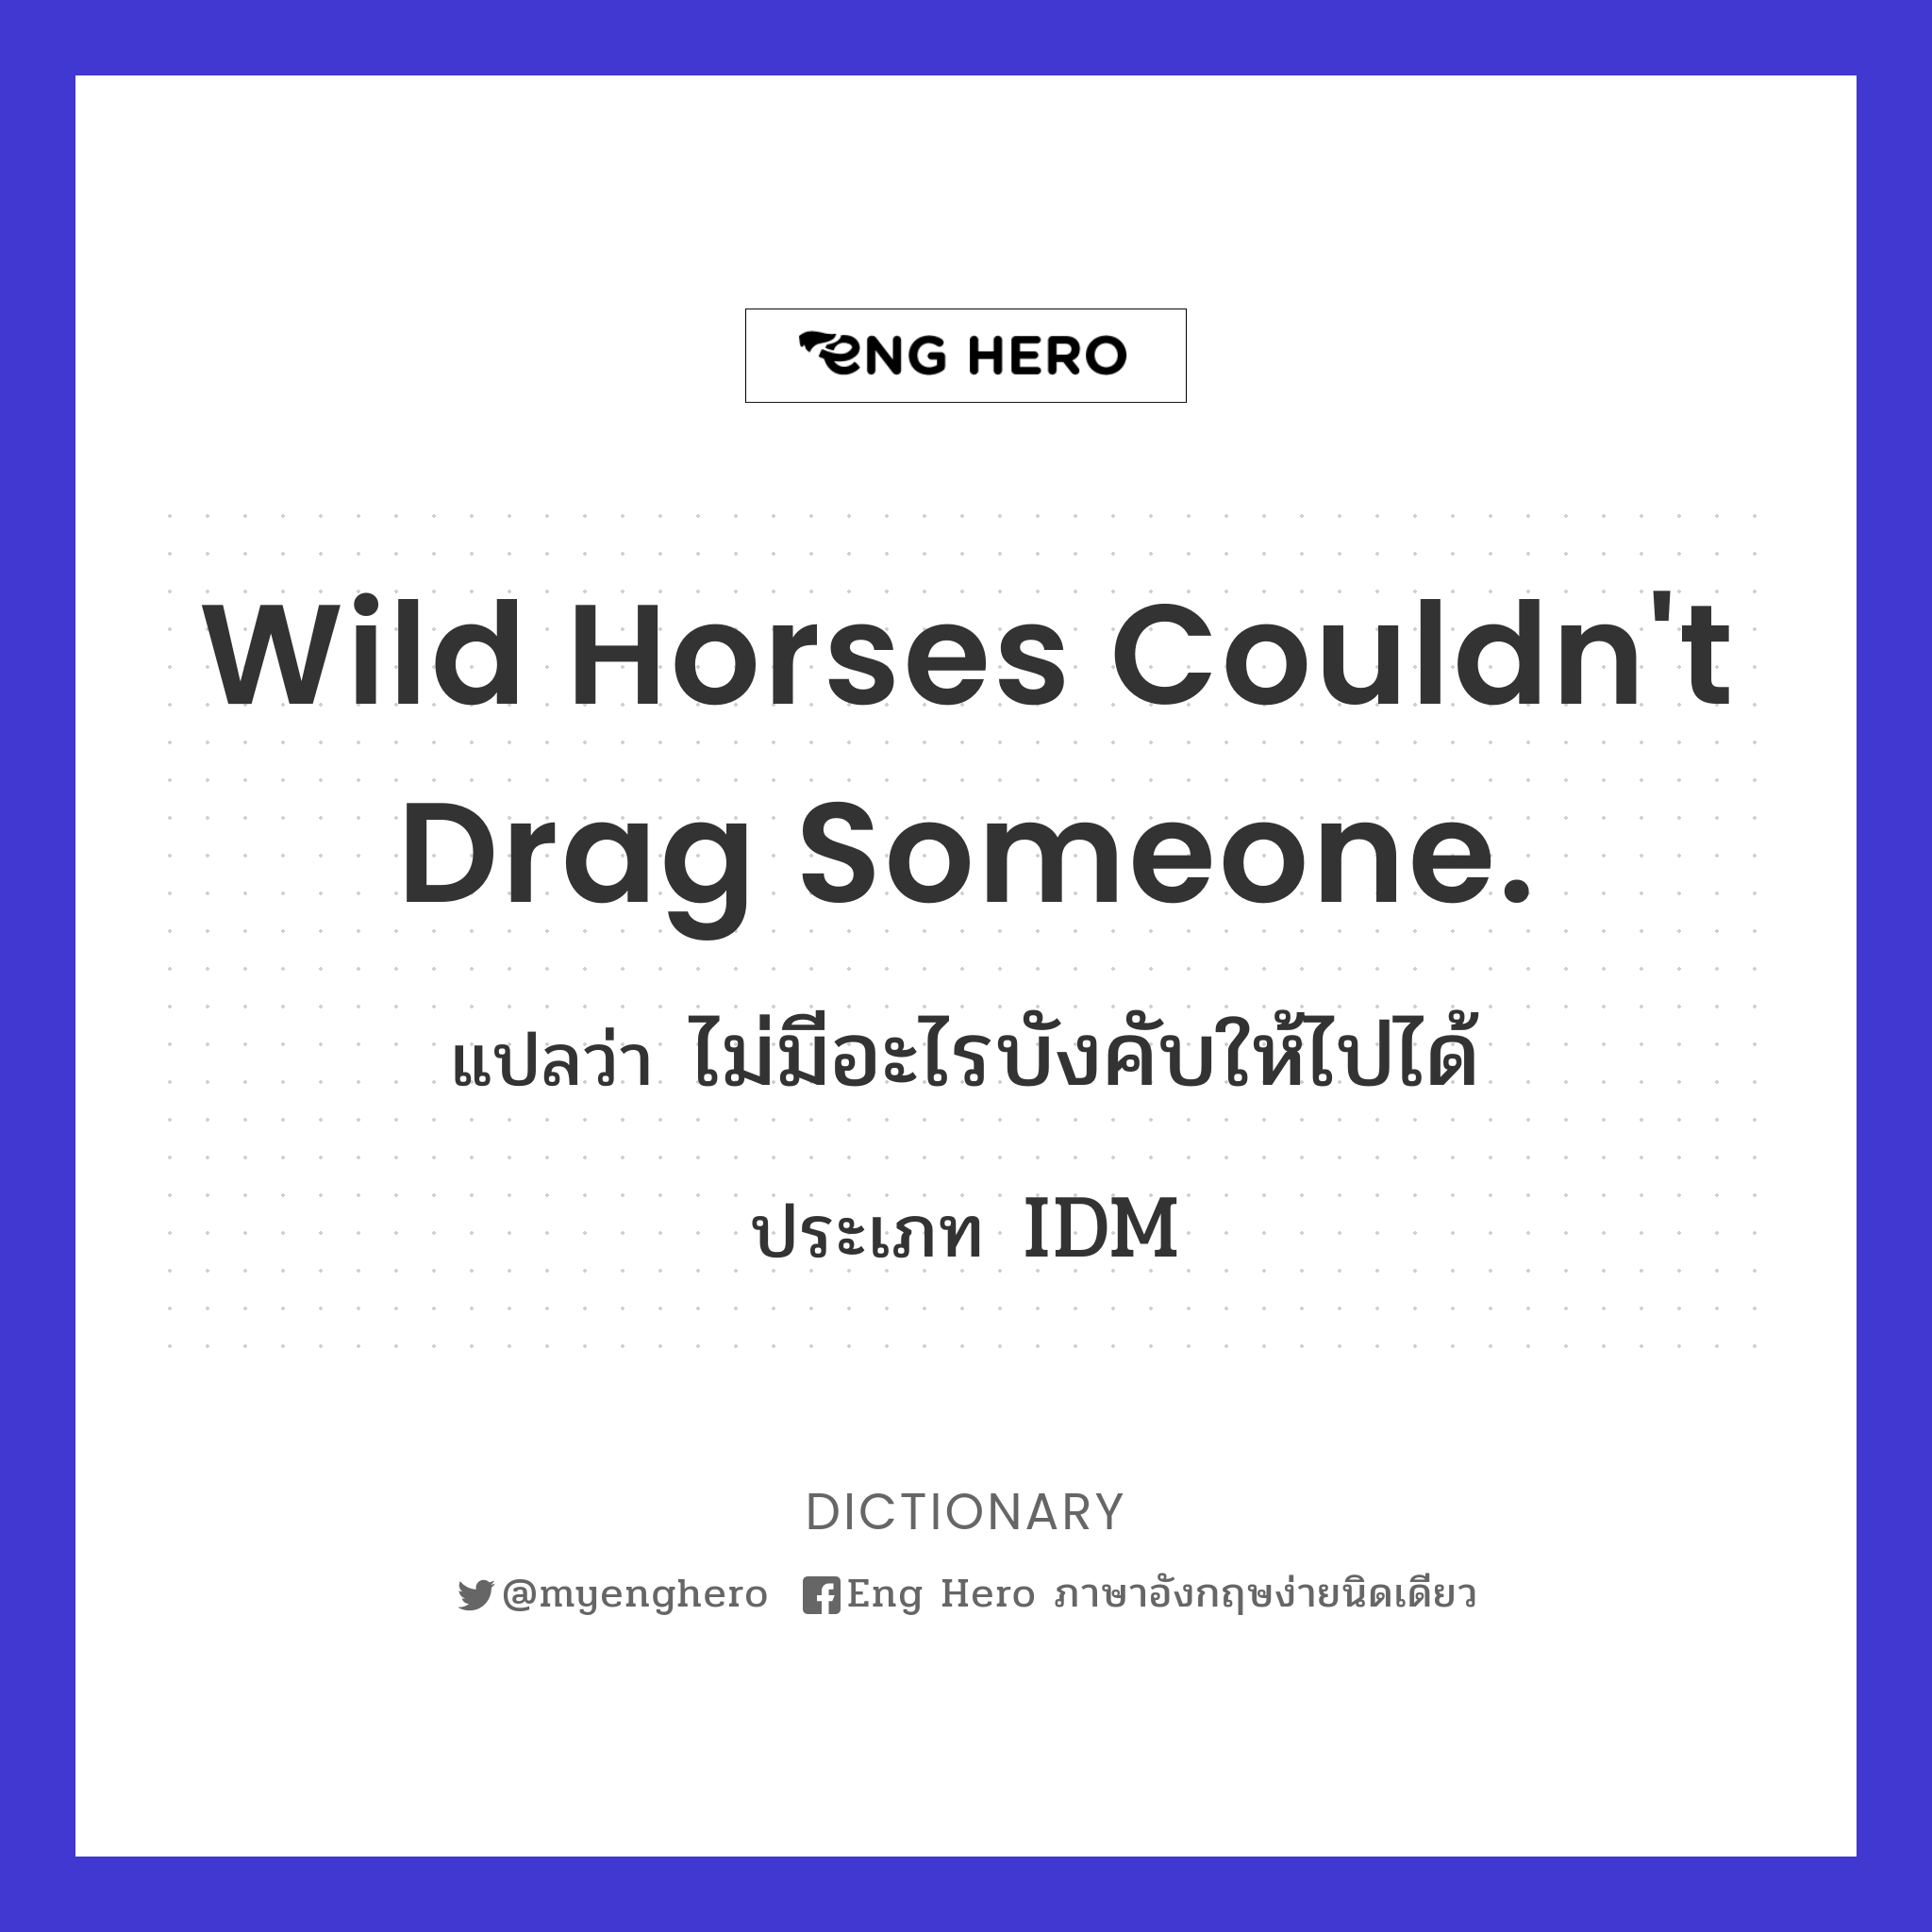 Wild horses couldn't drag someone.